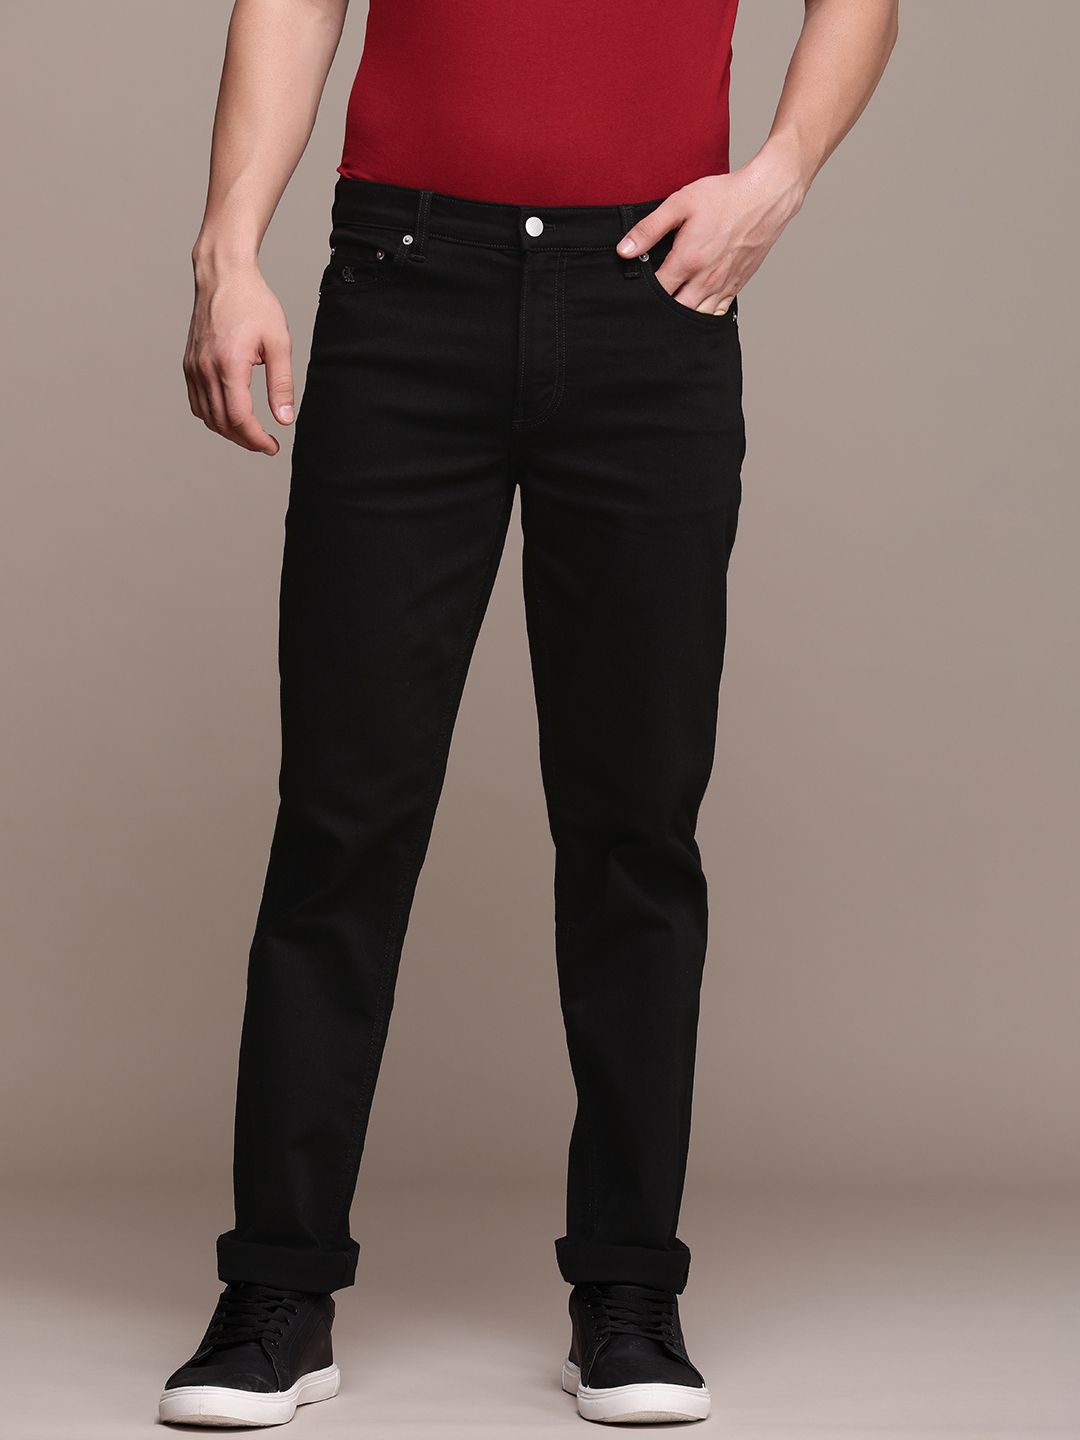 Calvin Klein Jeans Men Skinny Fit Stretchable Mid-Rise Jeans